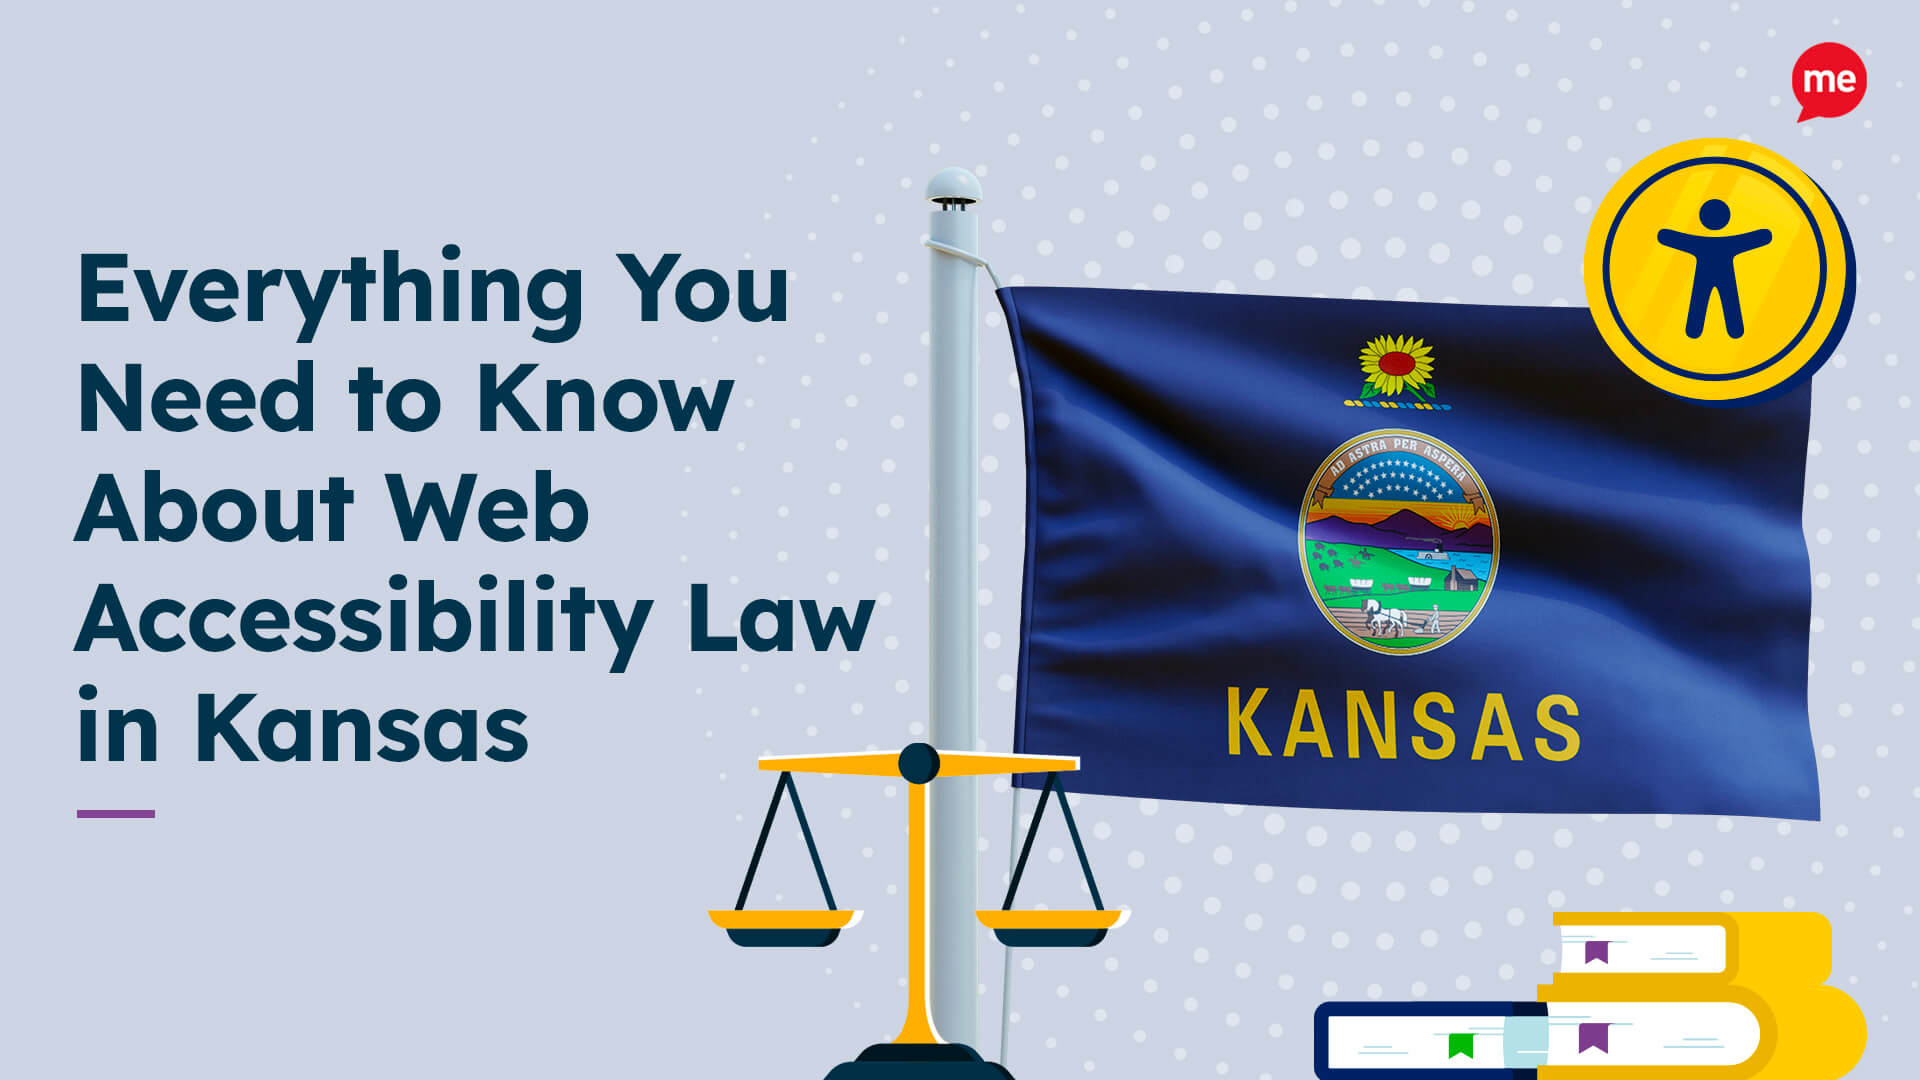 Everything You Need to Know About Web Accessibility Law in Kansas